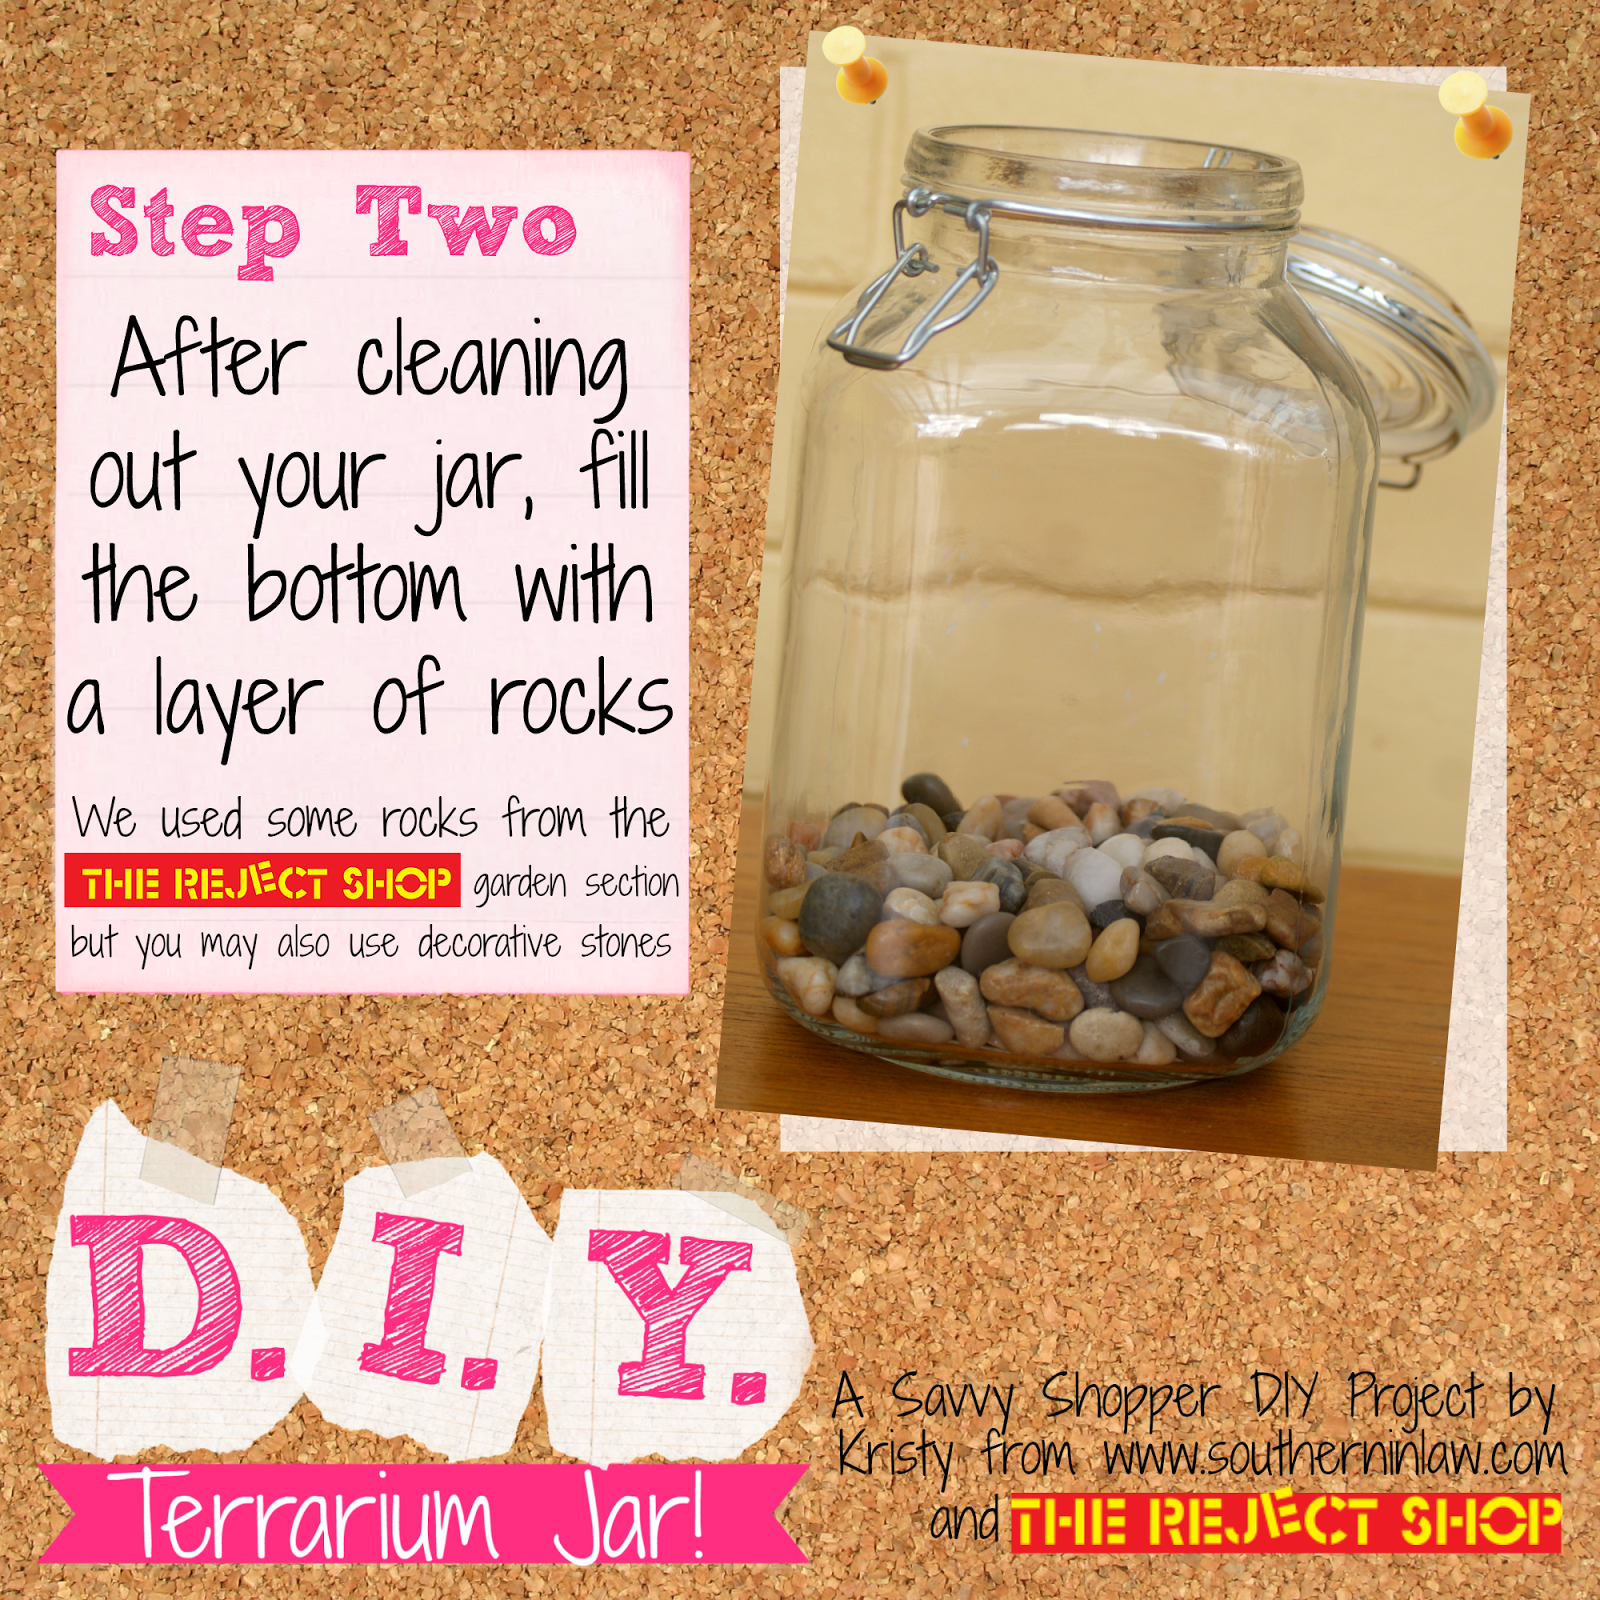 How to Make a Terrarium Jar on a Budget - Simple Weekend Projects - Dollar Store Craft Projects for Kids